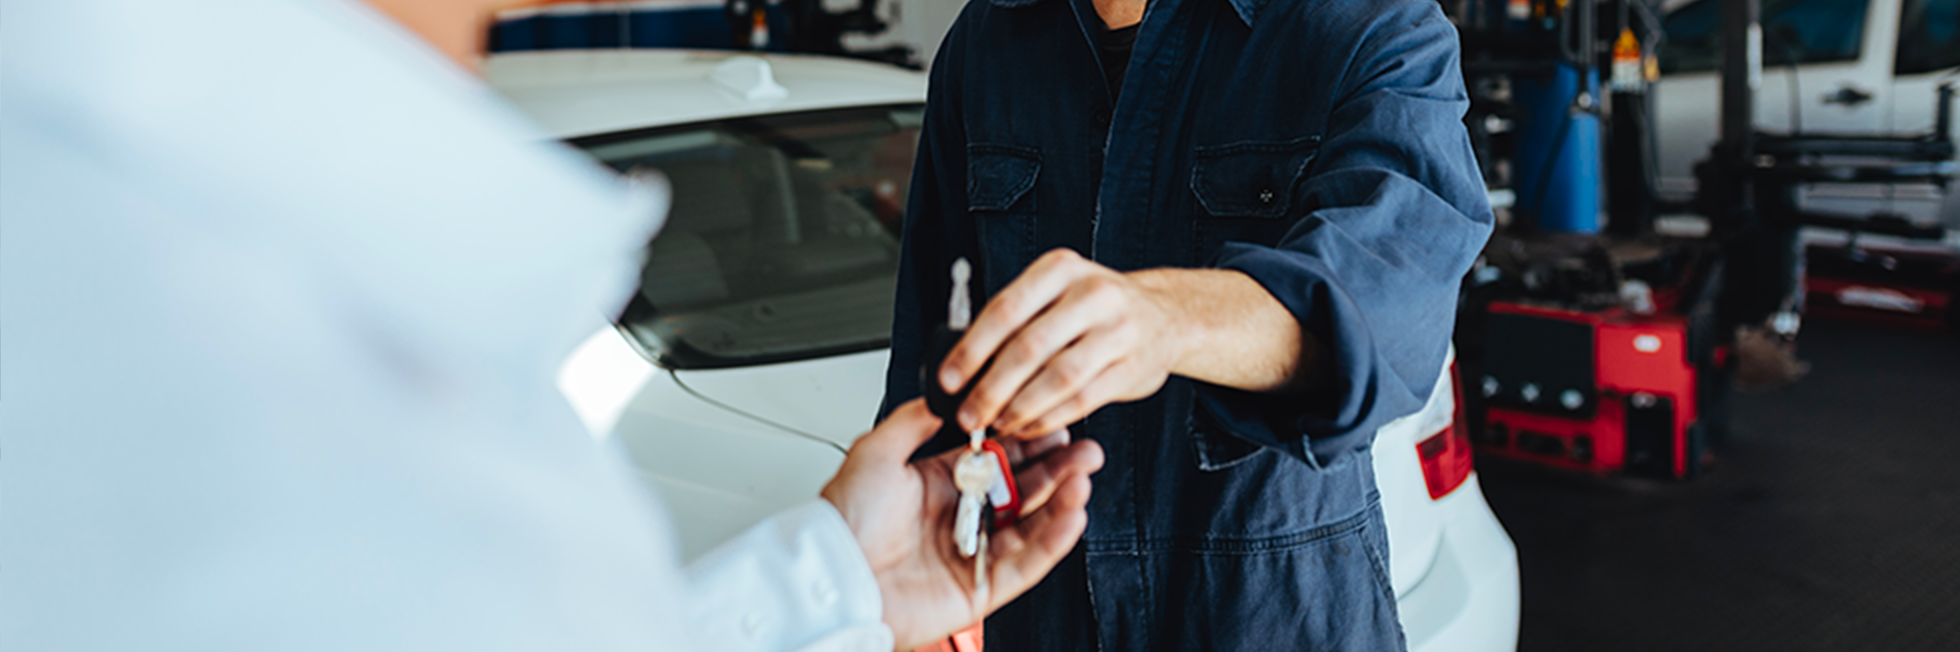 photo of workshop technician exchanging car keys with customer, white car visible in background, general setting of workshop